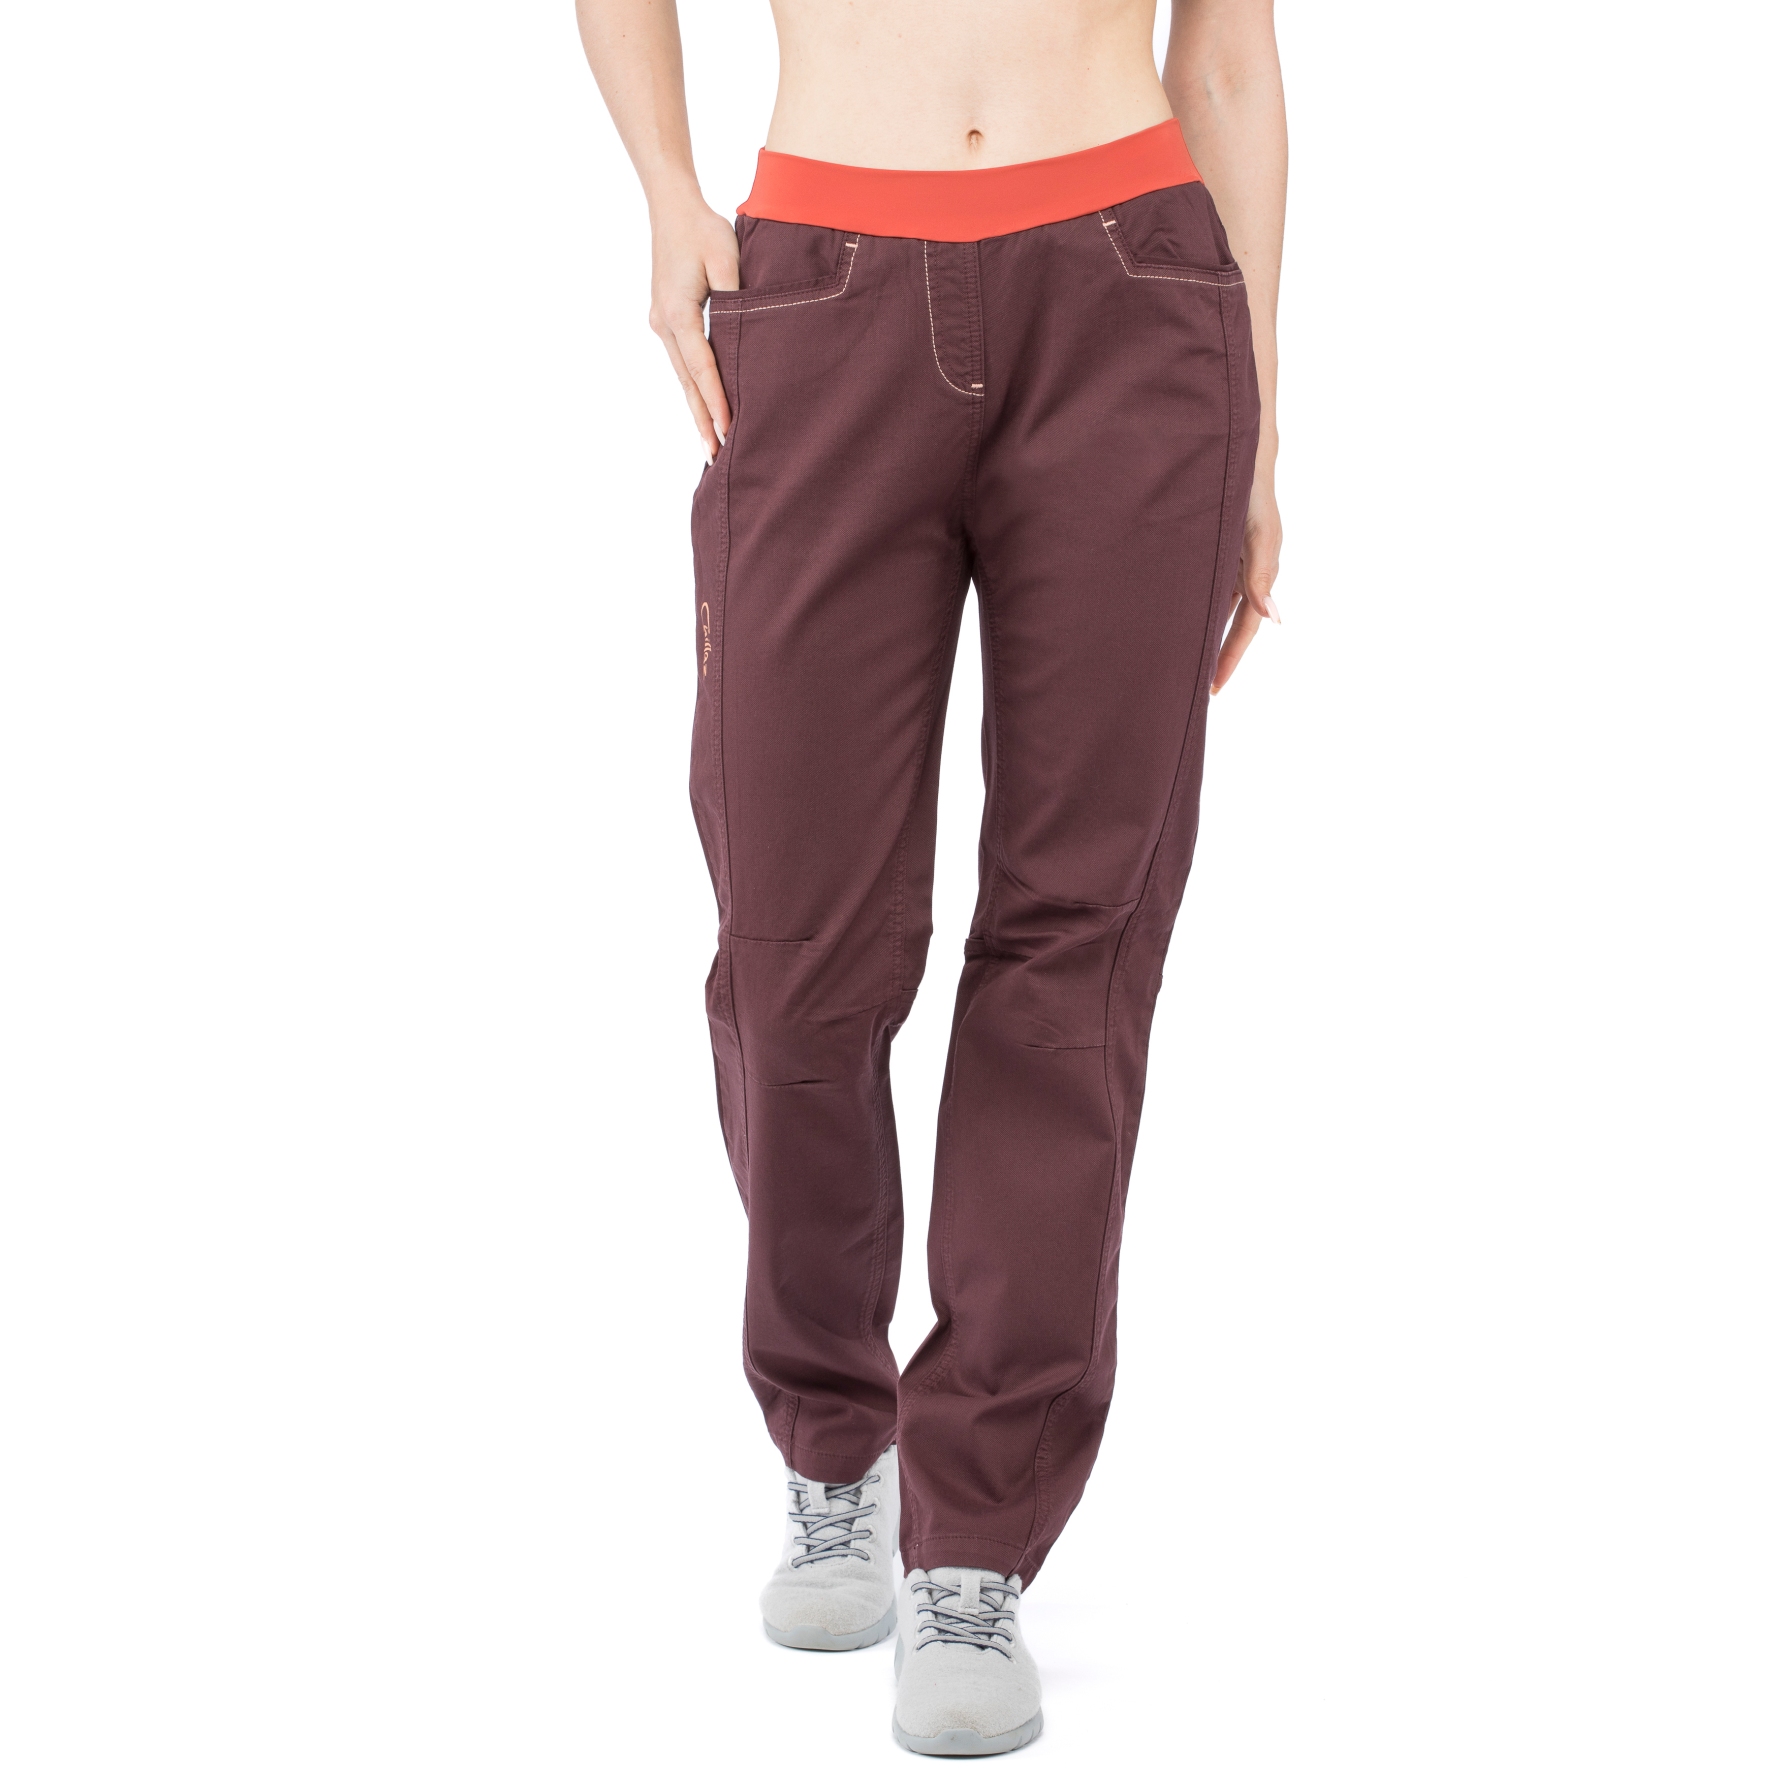 Picture of Chillaz Sarah 2.0 Pants Women - chocolate red